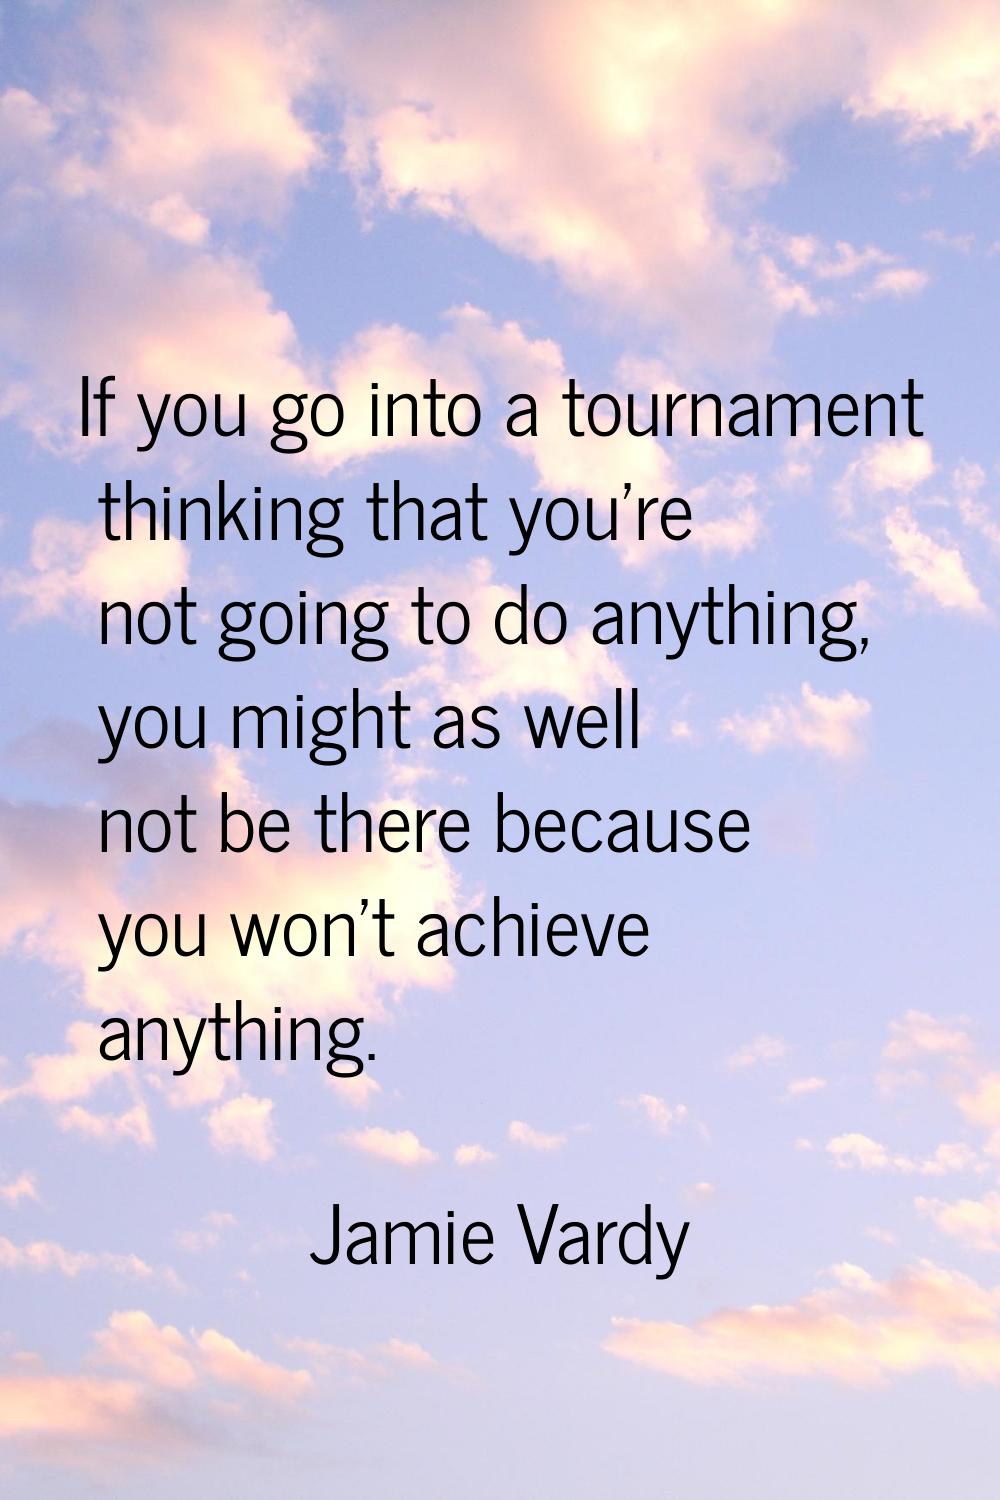 If you go into a tournament thinking that you're not going to do anything, you might as well not be